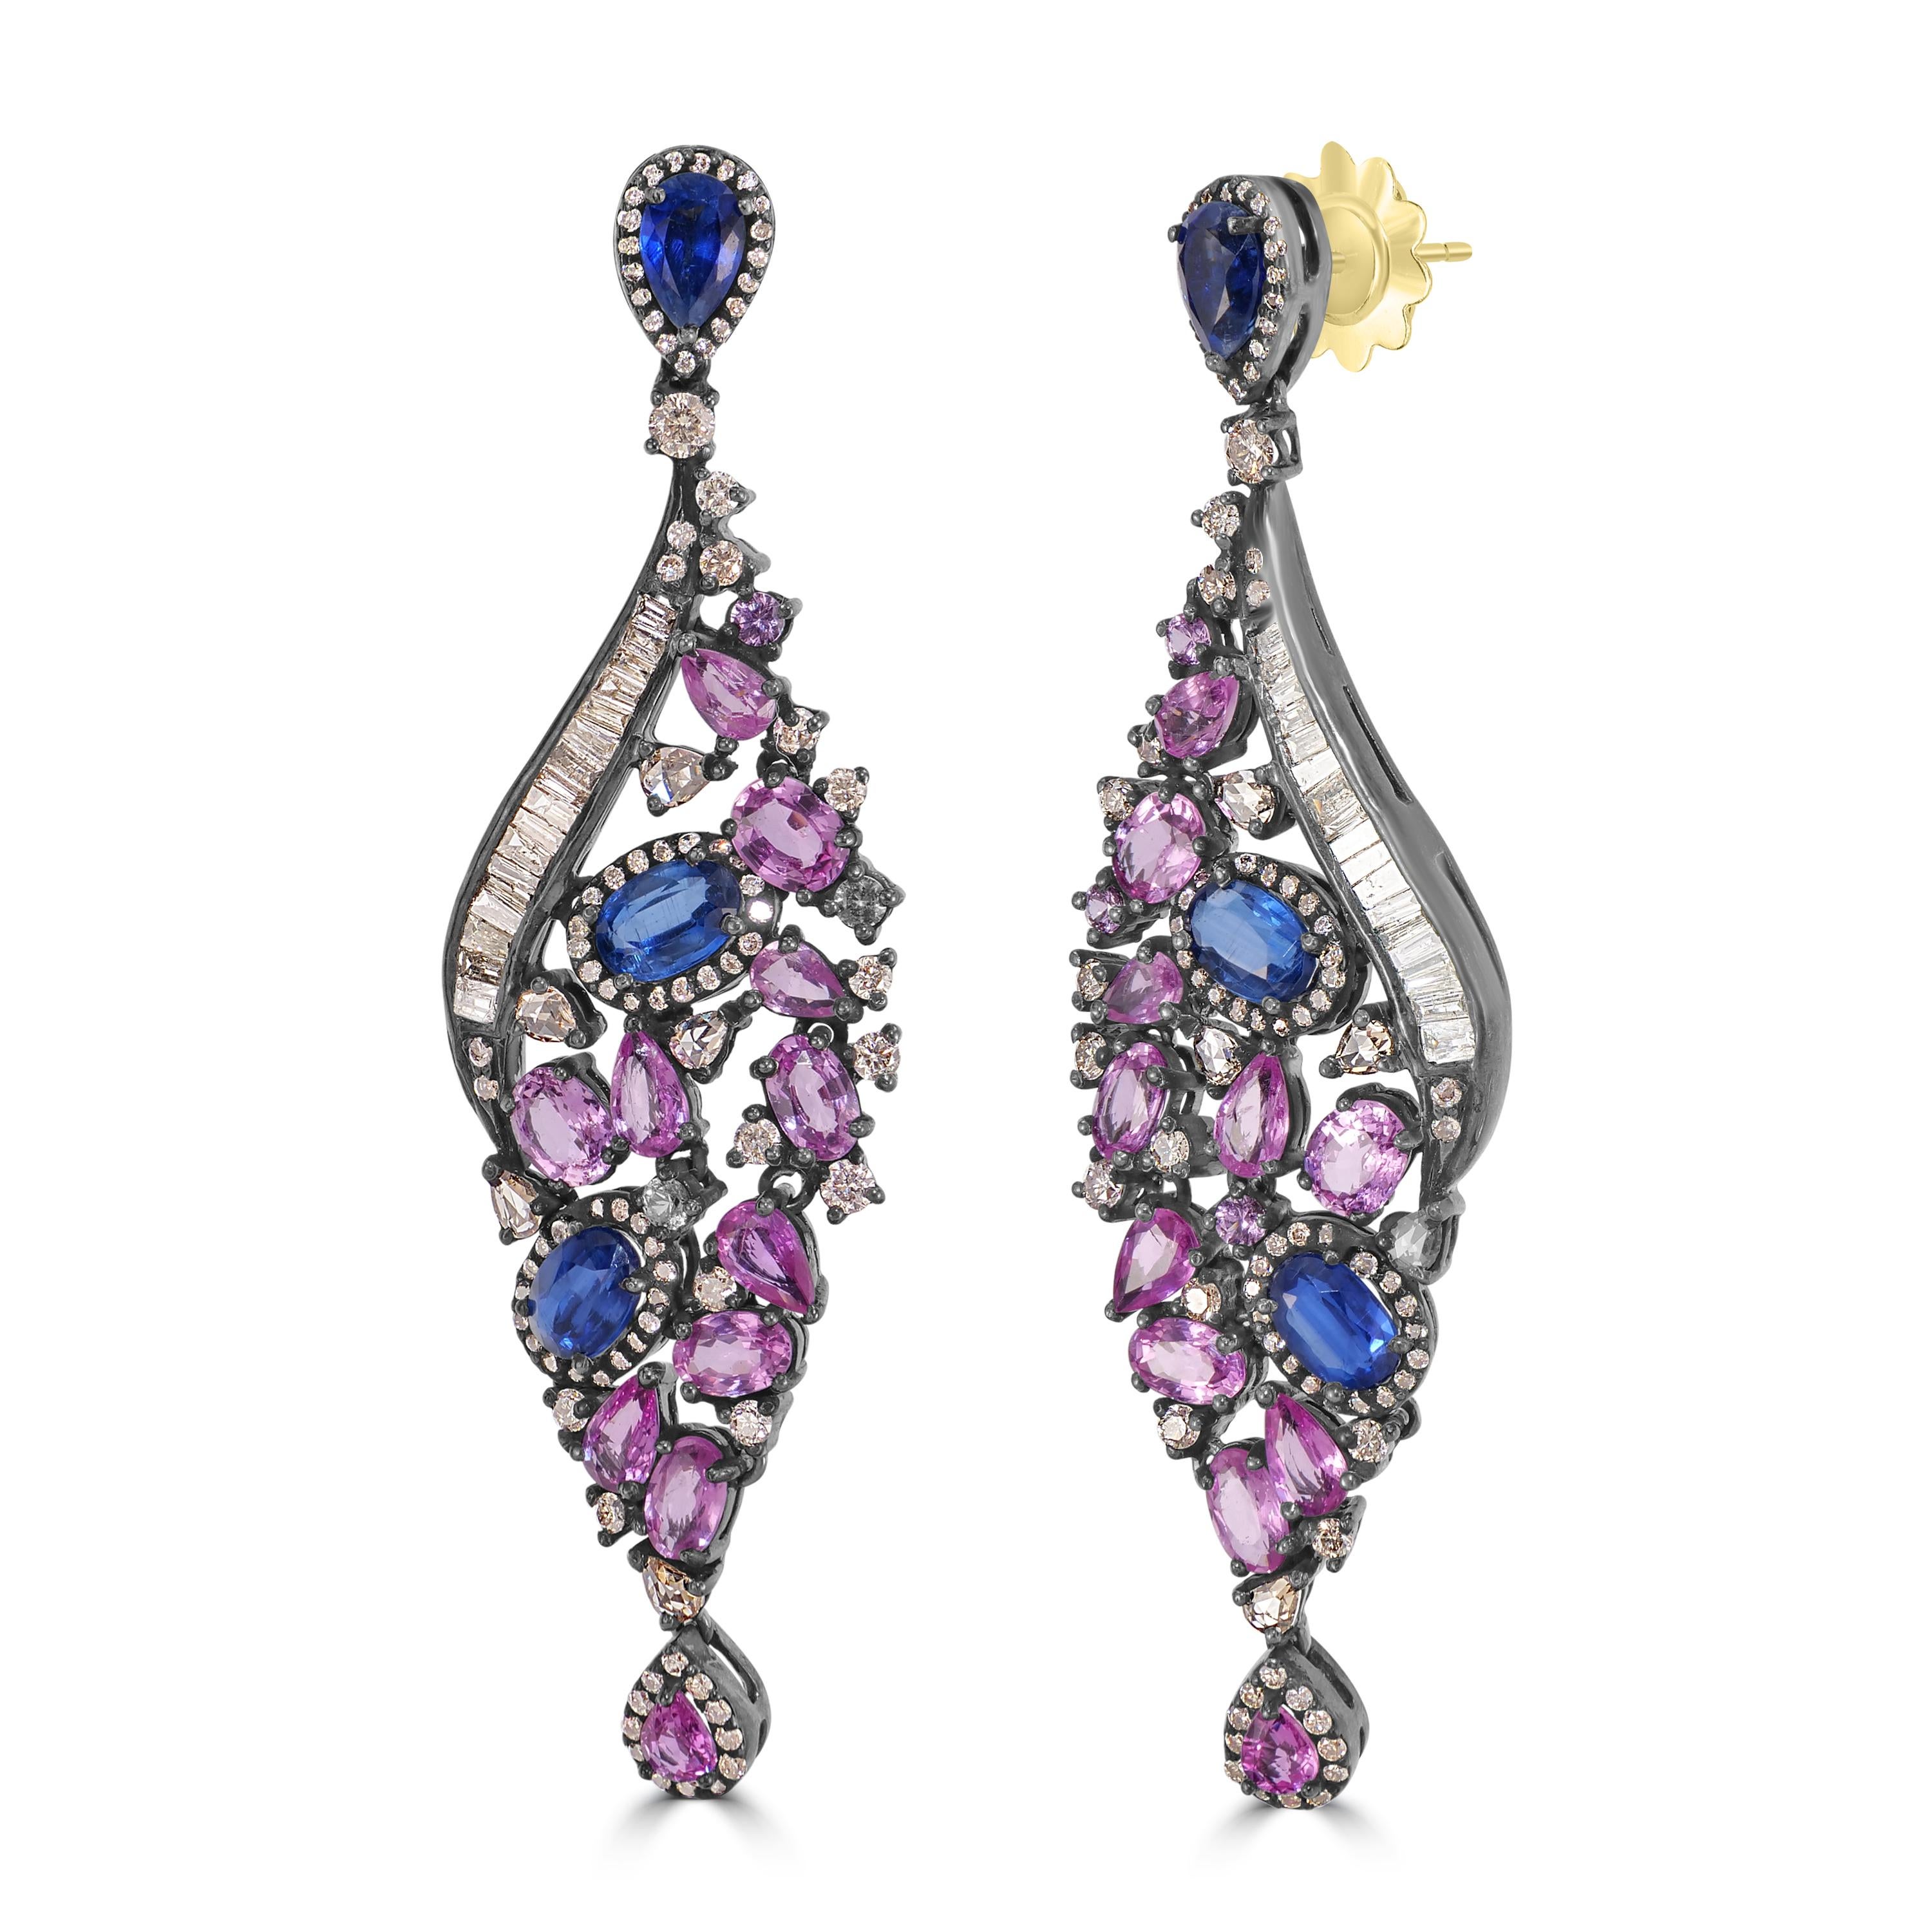 Introducing our Victorian 13.72 Cttw. Pink Sapphire, Kyanite, and Diamond Dangle Earrings – a captivating blend of elegance and sophistication.

At the pinnacle of these earrings sits a pear-shaped blue sapphire surmount, encased in a dazzling